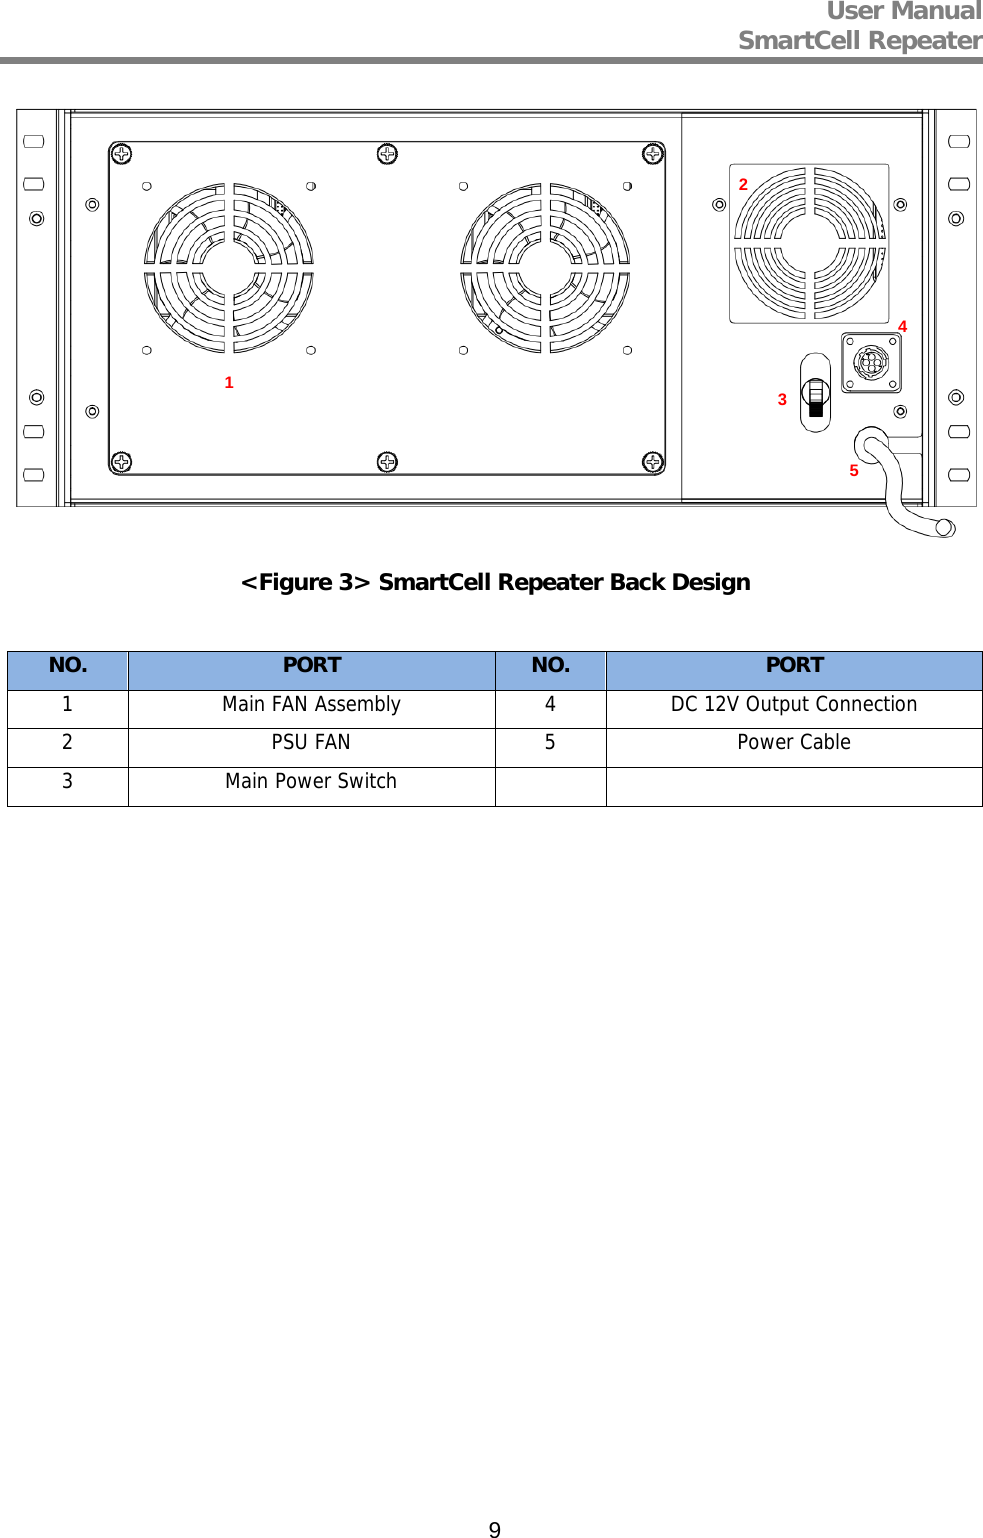 User Manual  SmartCell Repeater   9 &lt;Figure 3&gt; SmartCell Repeater Back Design  NO.  PORT  NO. PORT 1  Main FAN Assembly 4 DC 12V Output Connection2  PSU FAN  5 Power Cable 3 Main Power Switch     12 3 5 4